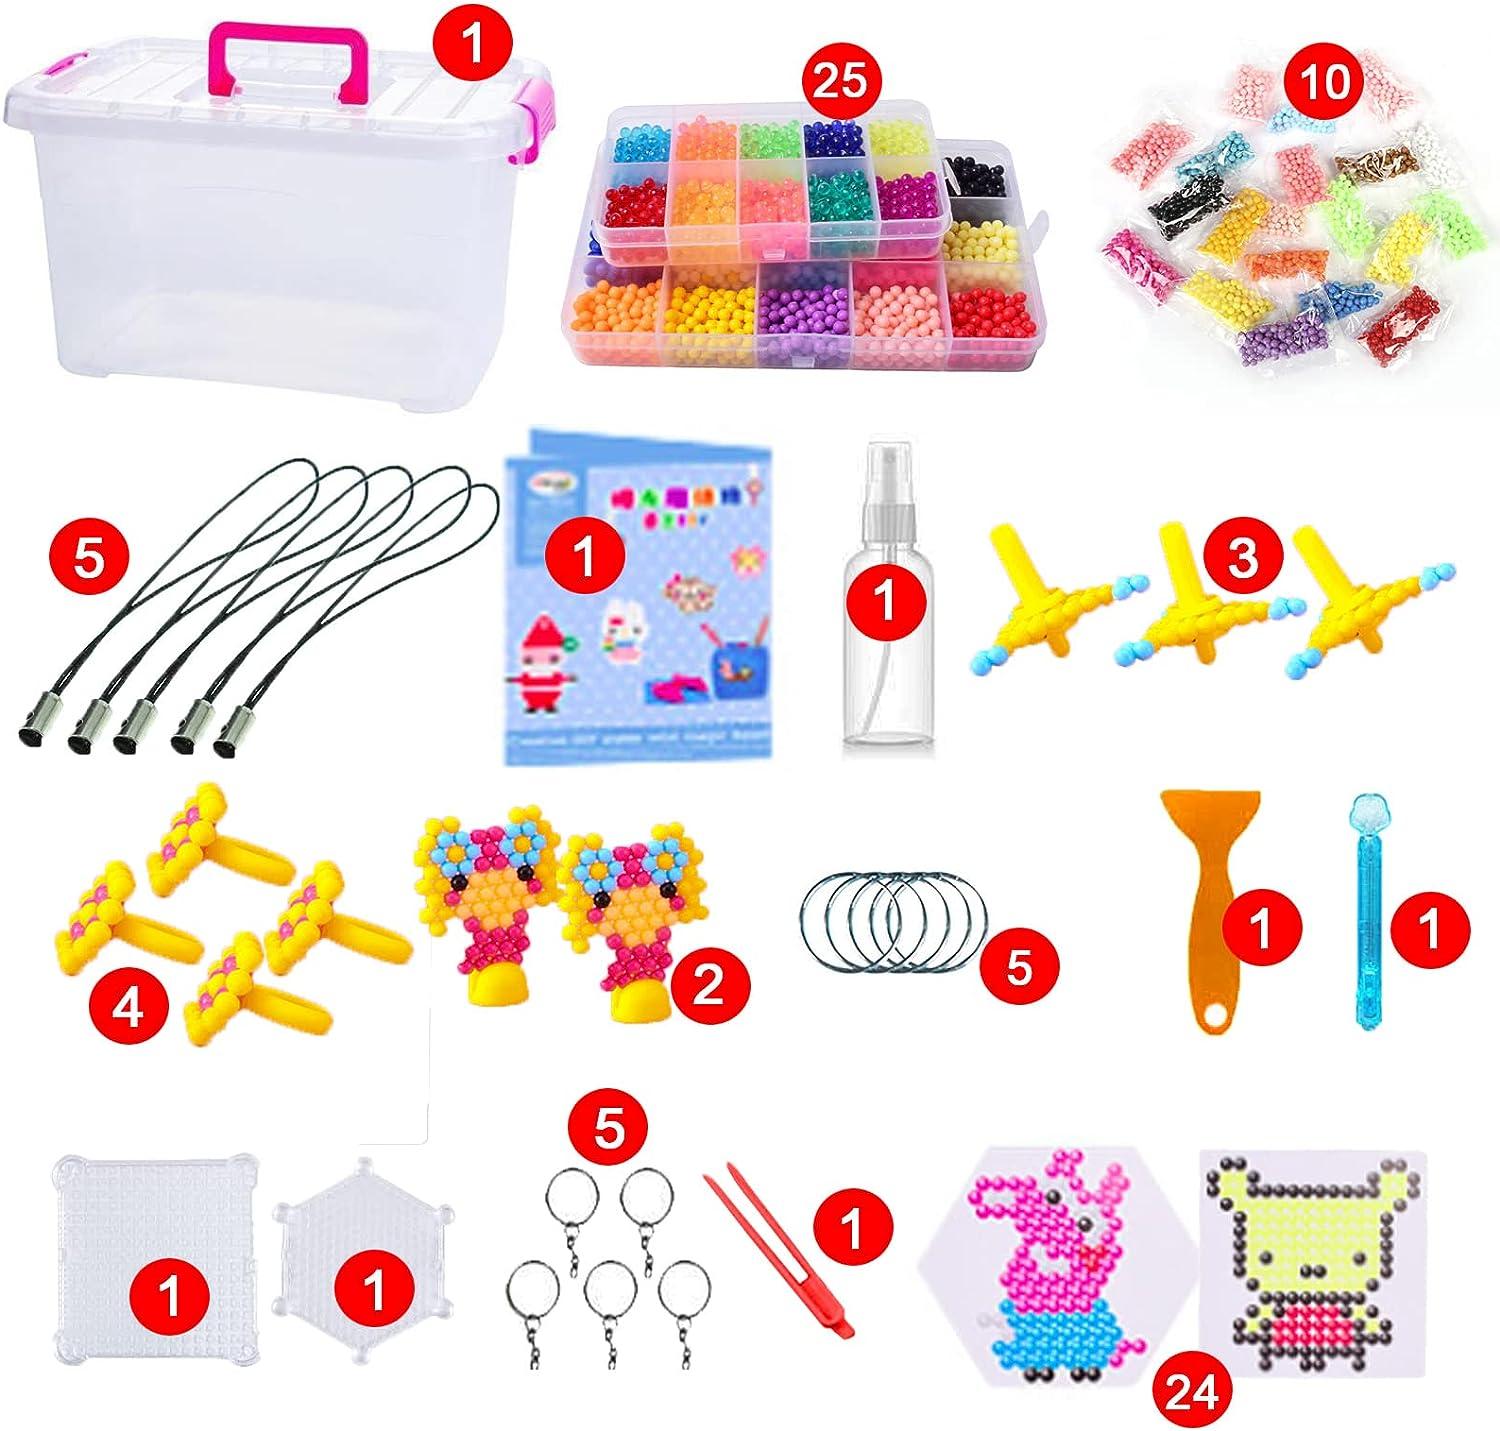 Handmade Magic Water Fuse Beads DIY Art Toys Sticky Sensory Set With  Accessories Perfect Party Craft Games 231013 From Lang08, $9.64